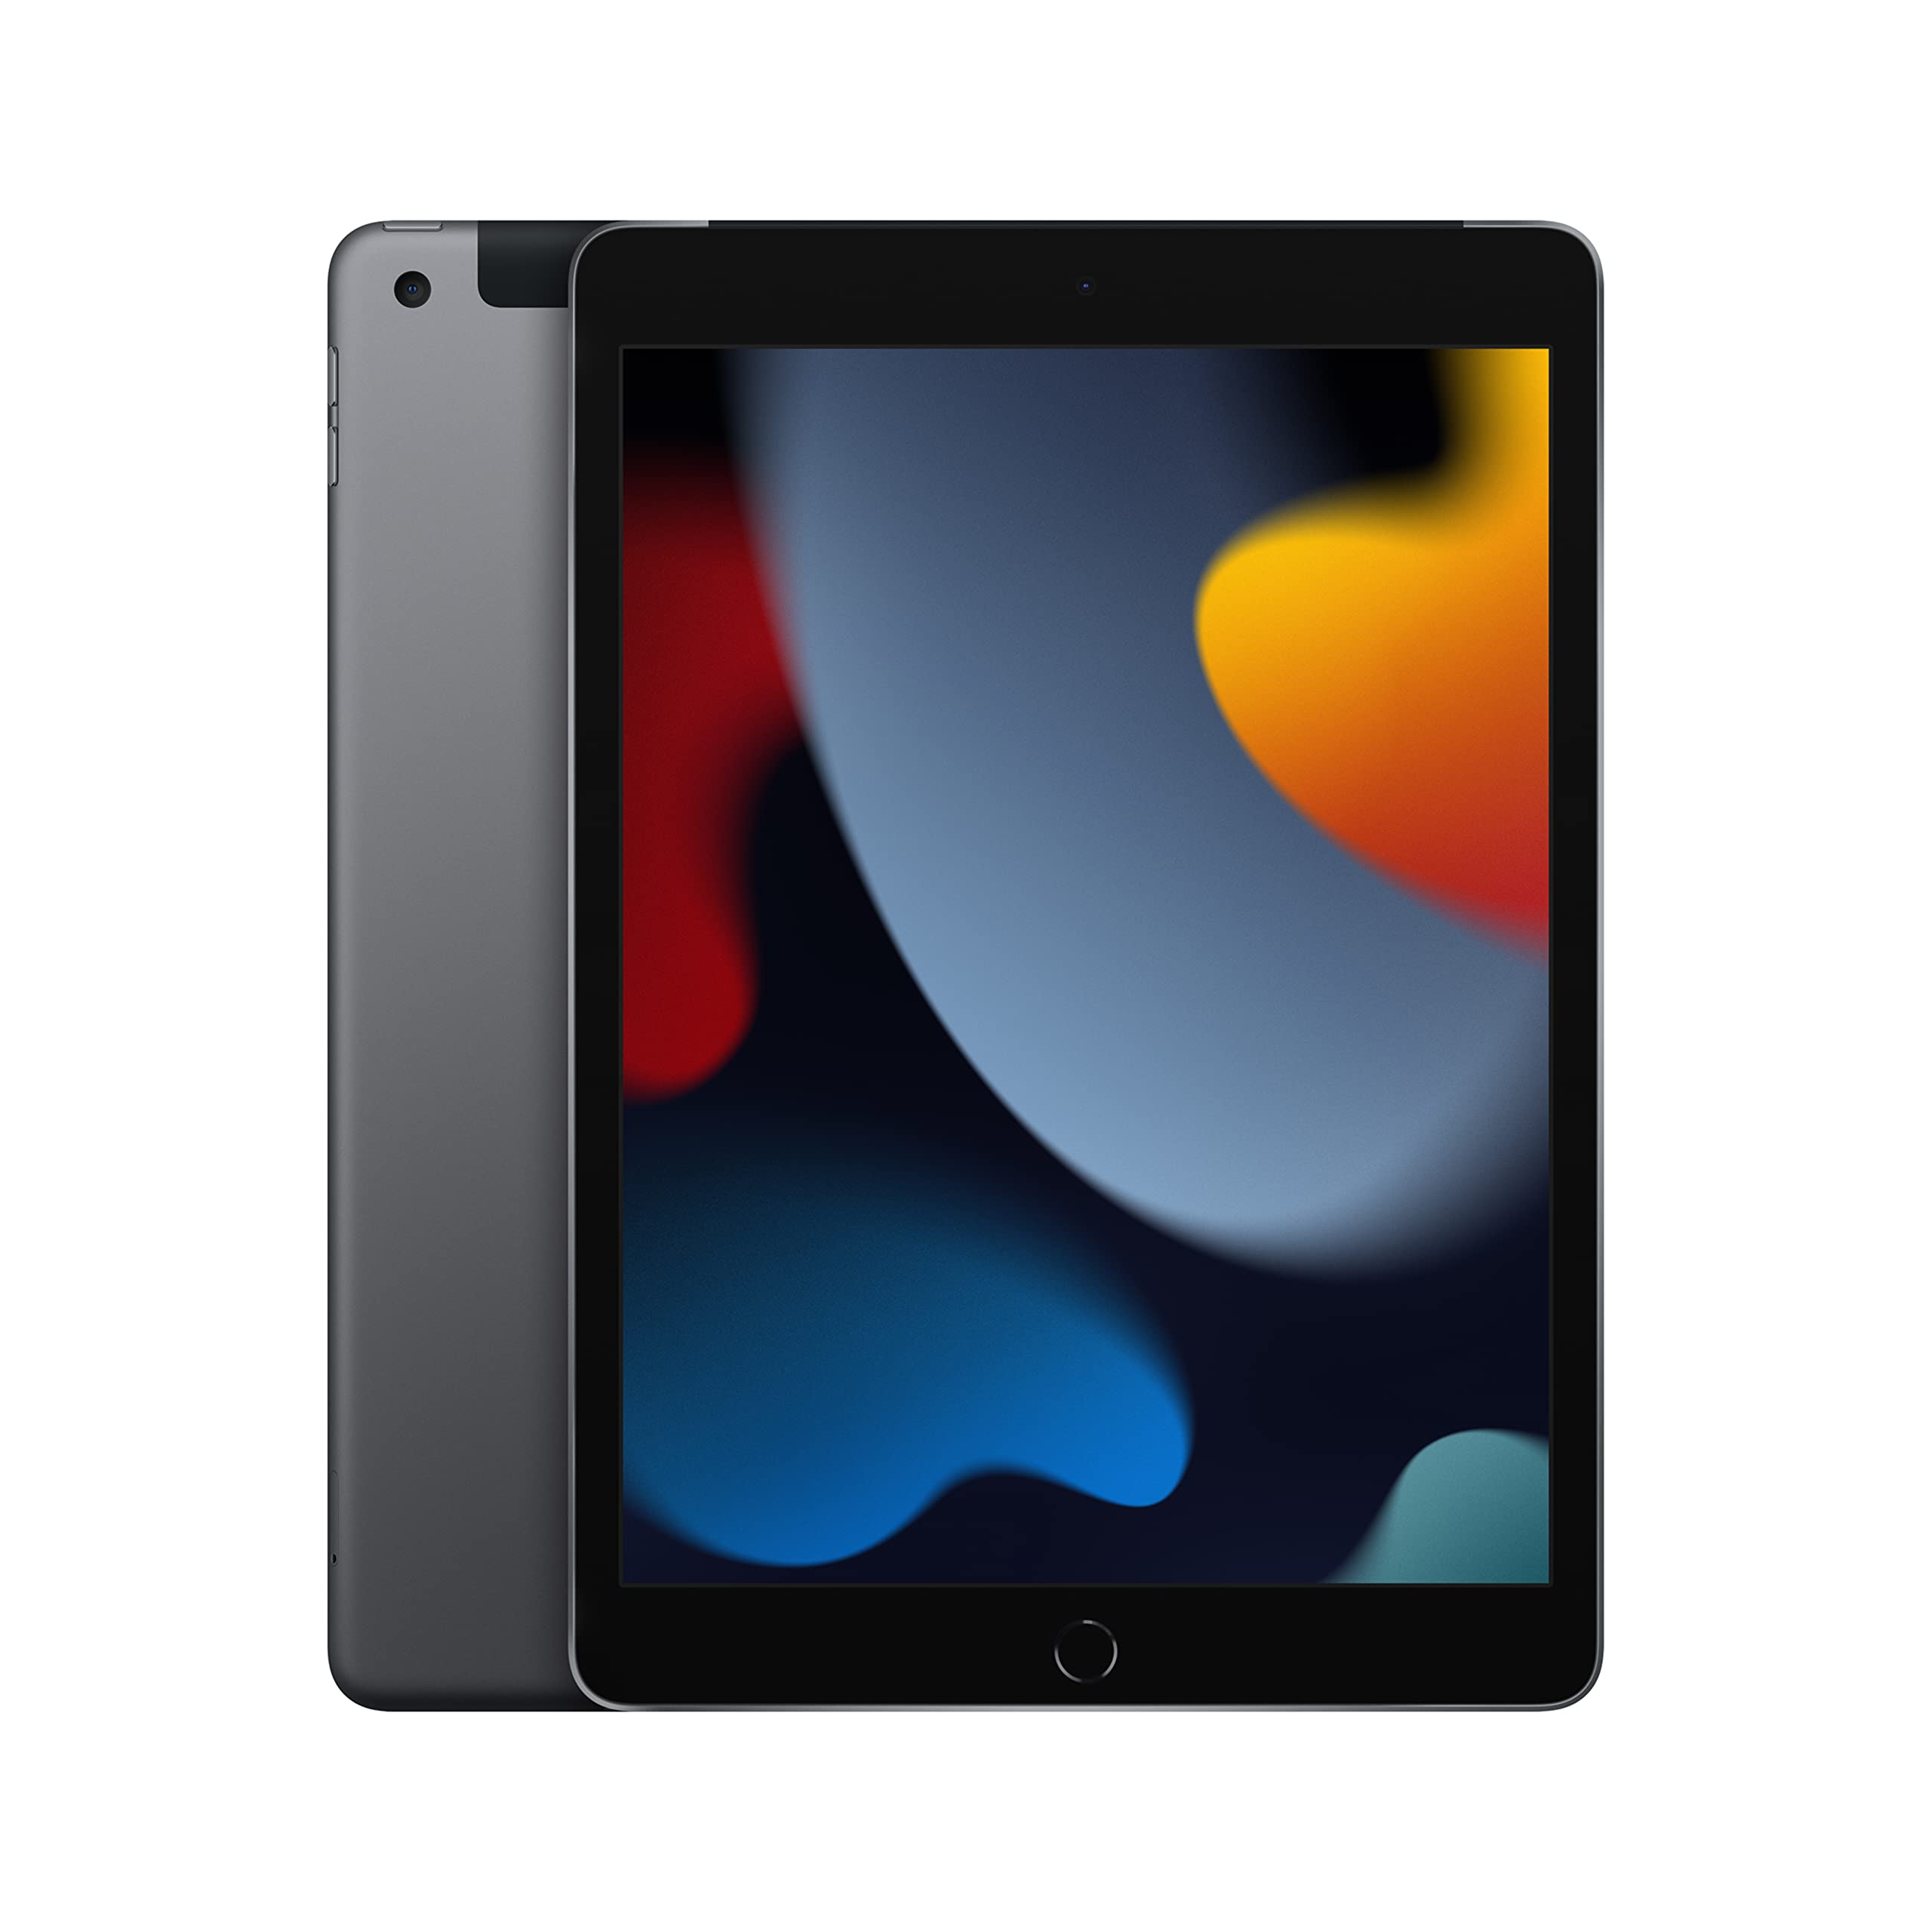 Apple iPad (9th Generation): with A13 Bionic chip, 10.2-inch Retina Display, 64GB, Wi-Fi + 4G LTE Cellular, 12MP front/8MP Back Camera, Touch ID, All-Day Battery Life – Space Gray